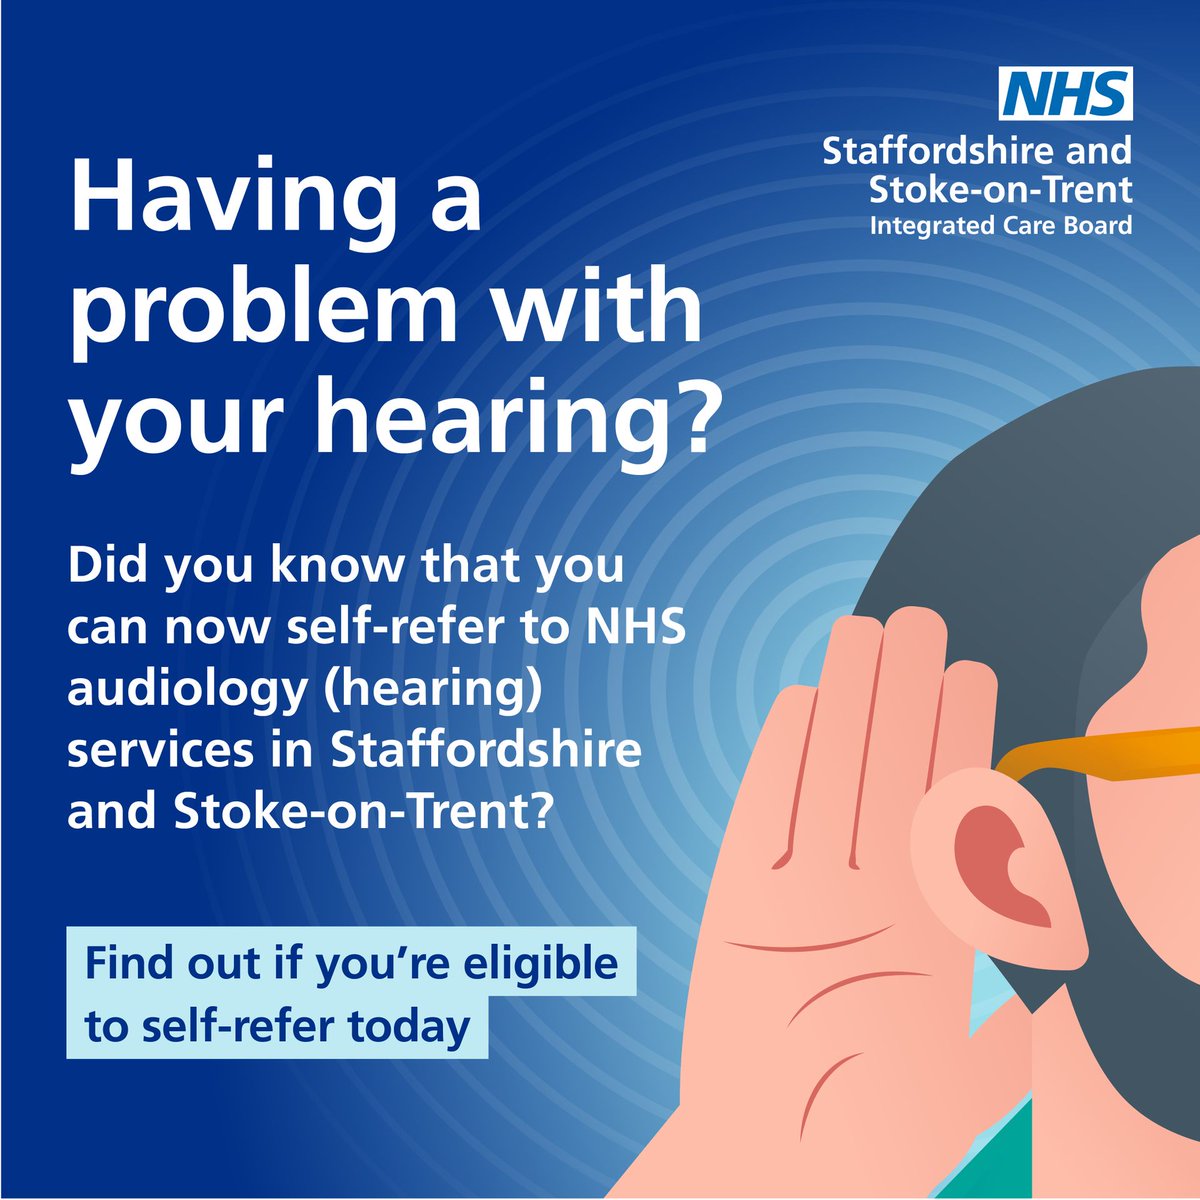 If you’re having problems with your hearing, you might not have to wait for an appointment with your GP to get a referral. Find out if you are eligible to self-refer to NHS hearing services today. staffsstokeics.org.uk/your-health-an…